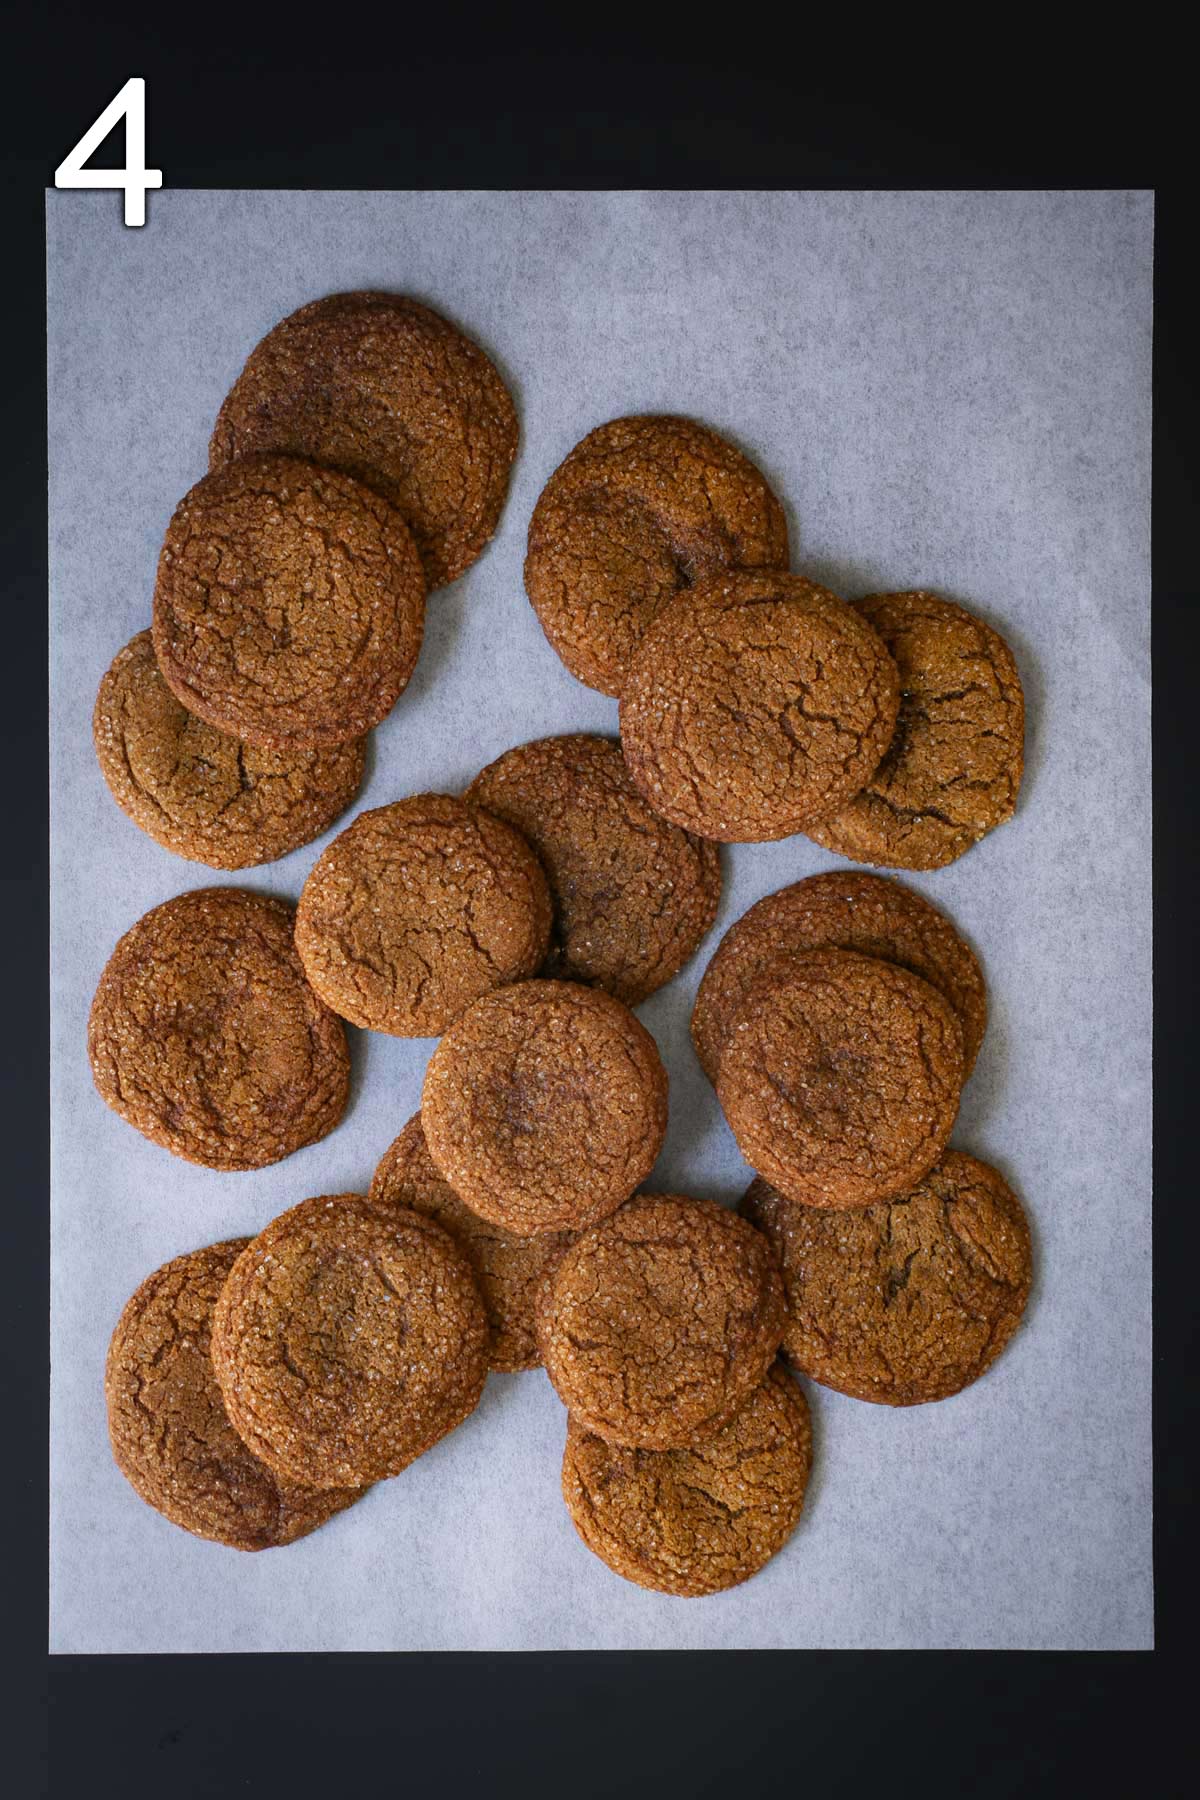 baked cookies on white parchment paper.